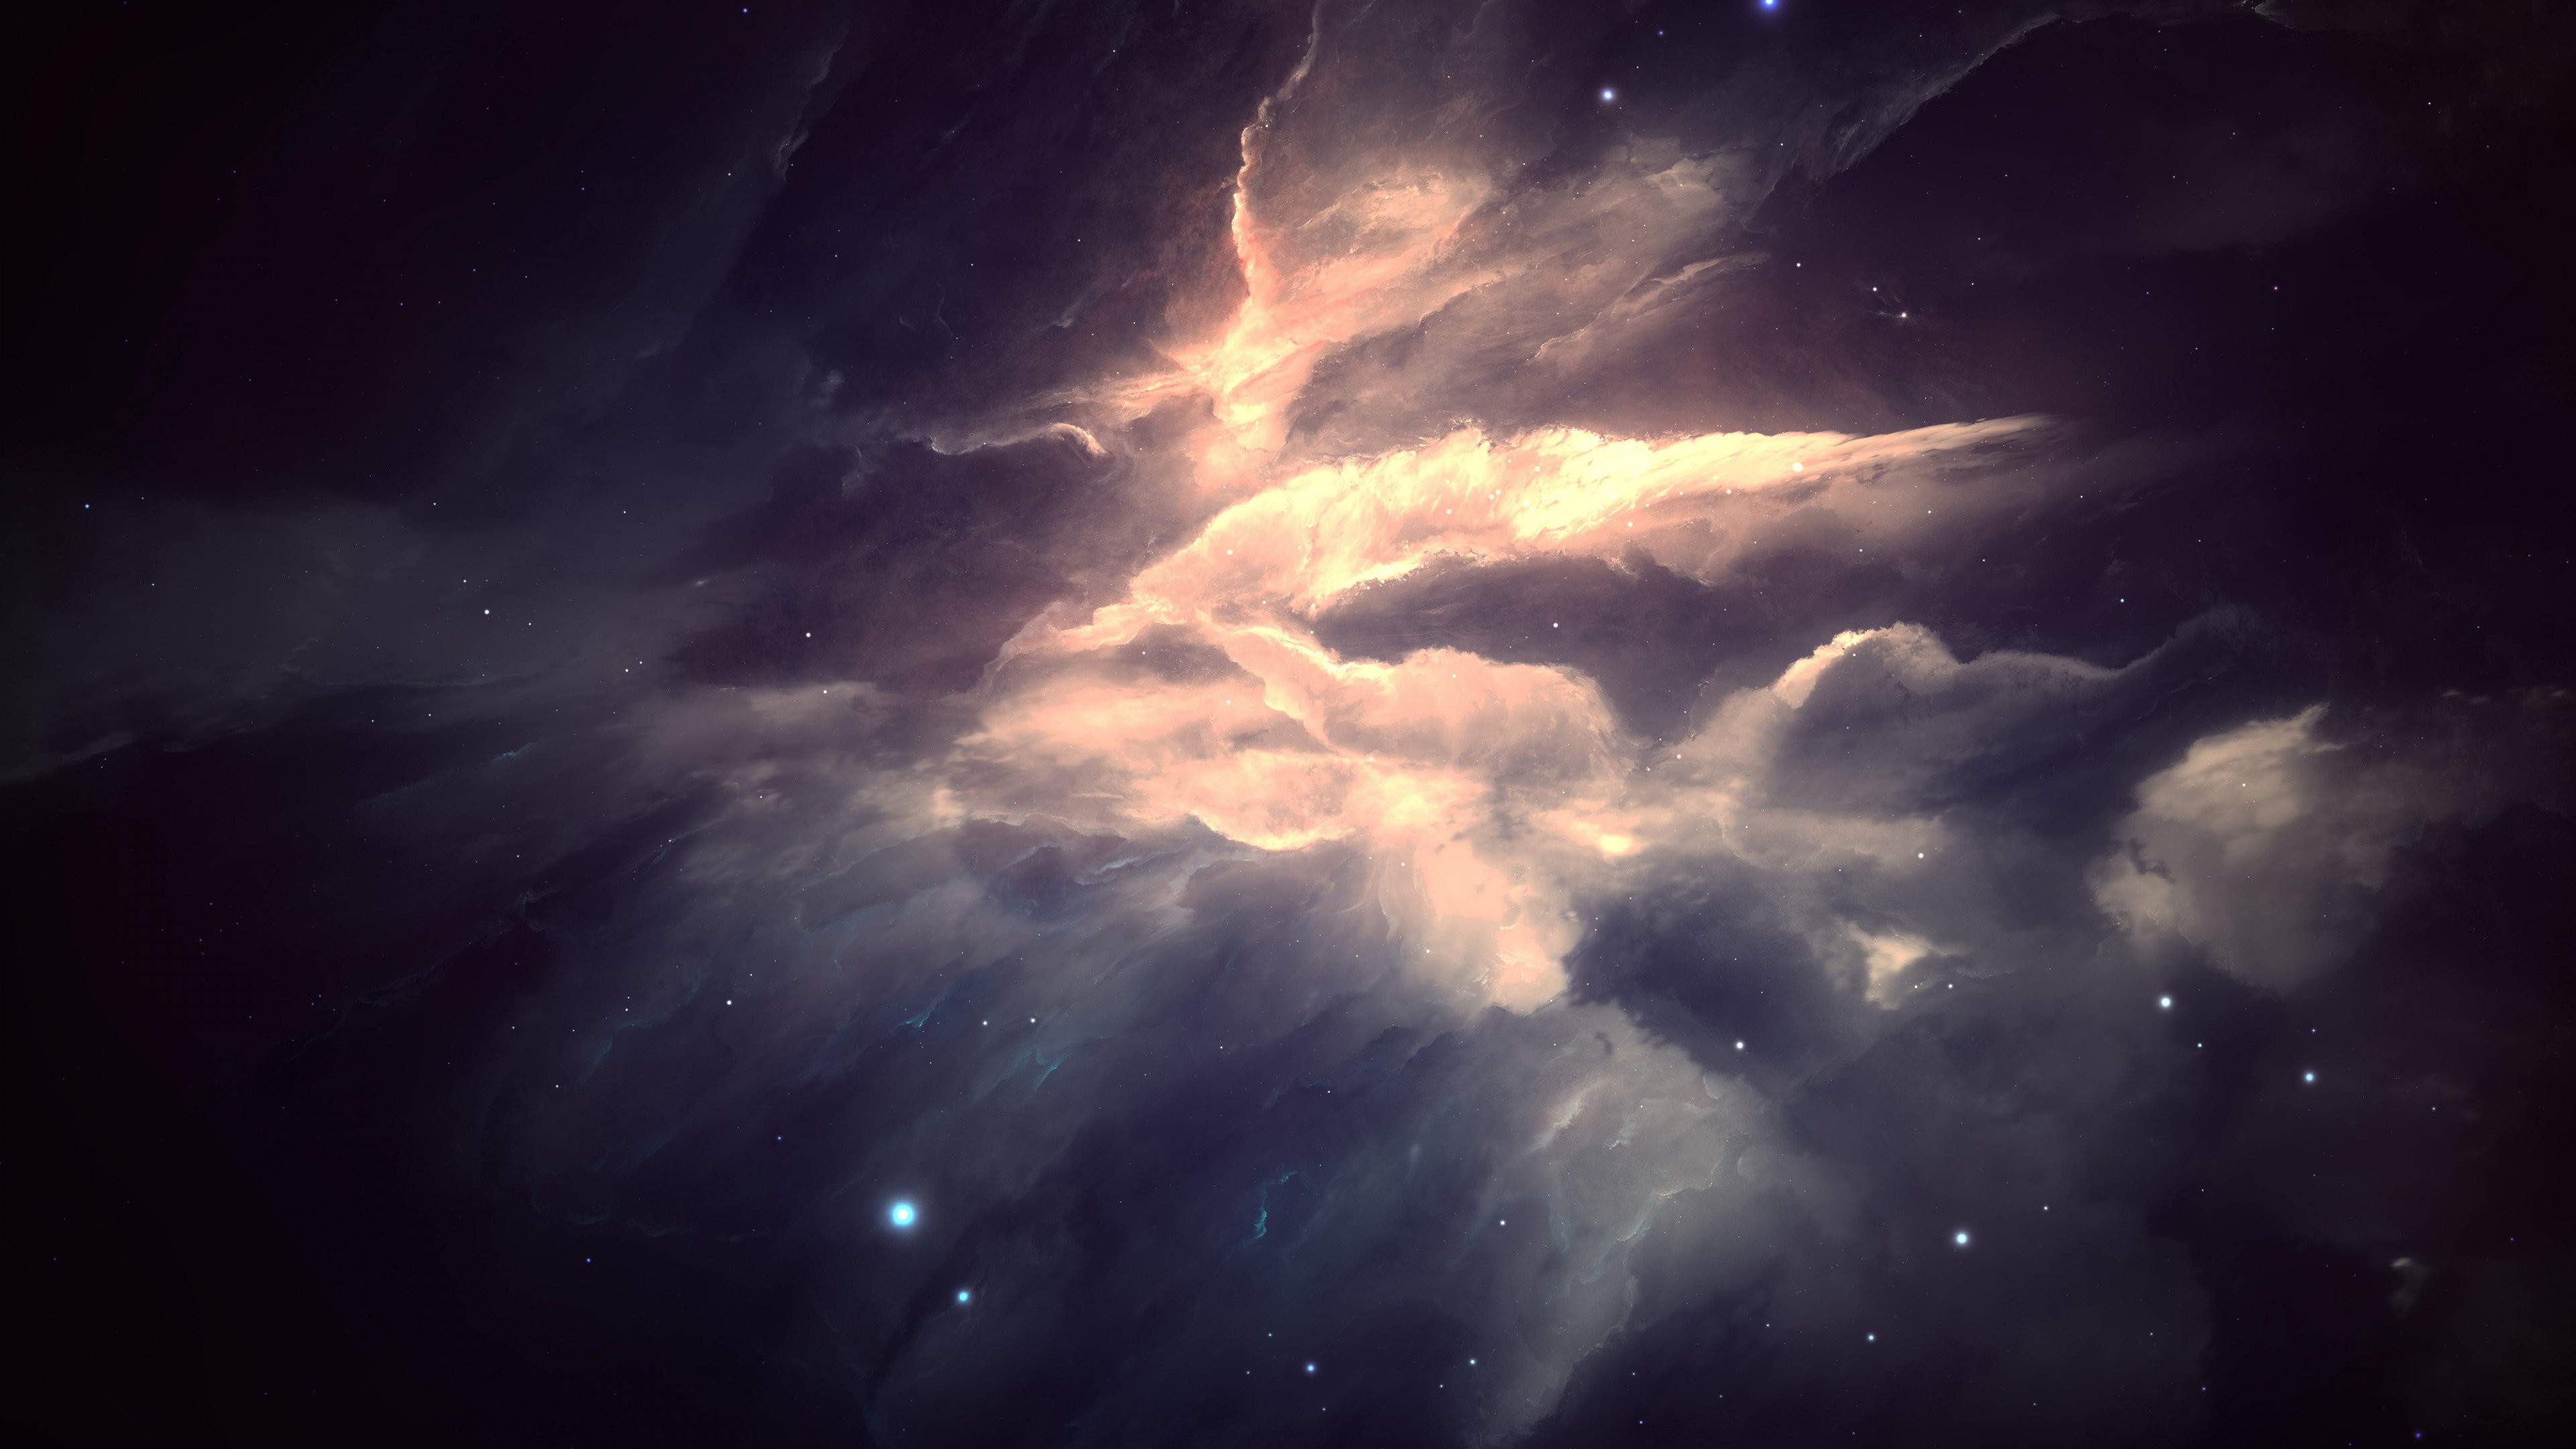 4K Space Wallpapers. by jakkuhtOct 23. Load 22 more images Grid view